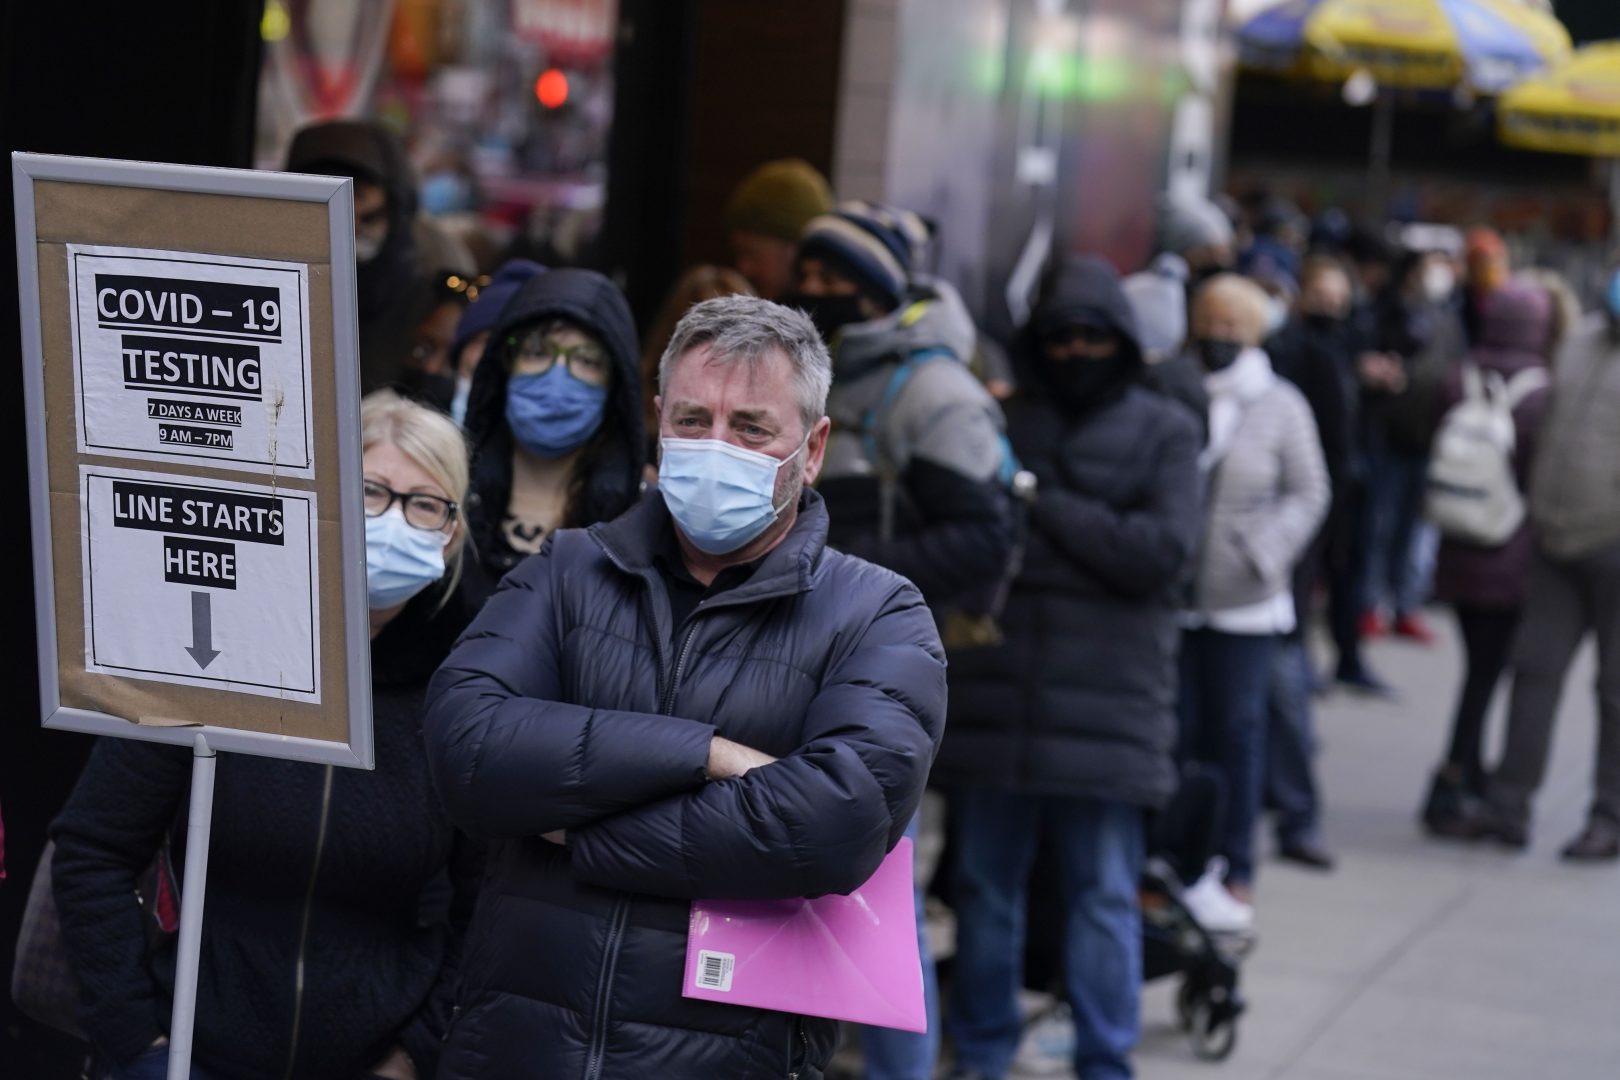 FILE - People wait in line at a COVID-19 testing site in New York' Times Square on Dec. 13, 2021. More than a year after the vaccine was rolled out, new cases of COVID-19 in the U.S. have soared to their highest level on record at over 265,000 per day on average, a surge driven largely by the highly contagious omicron variant. (AP Photo/Seth Wenig, File)